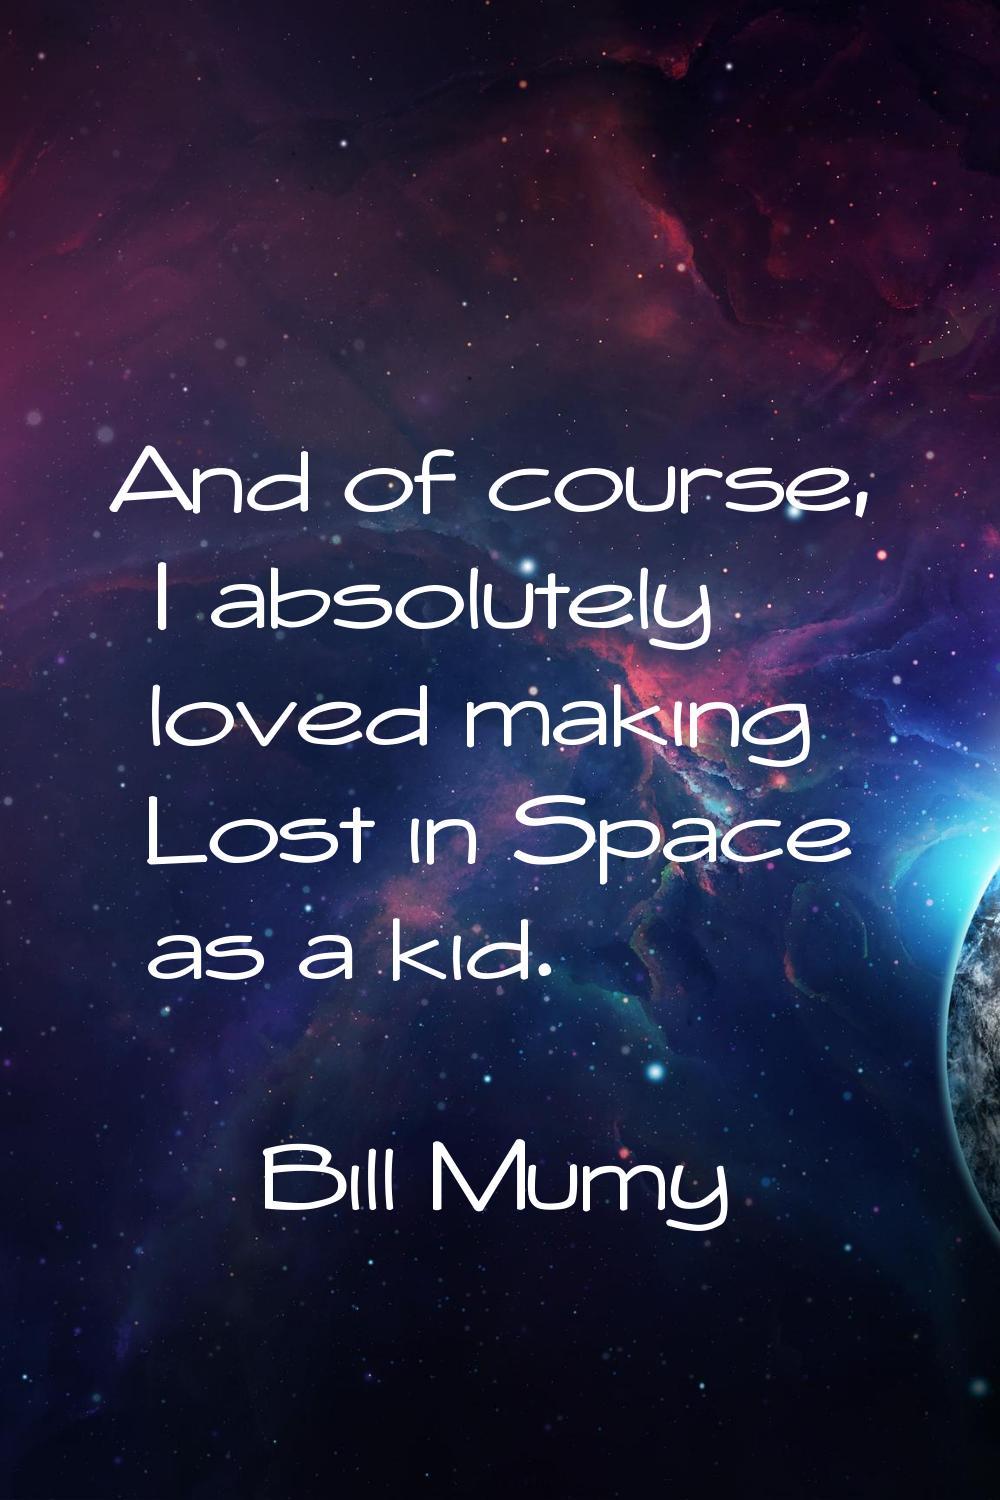 And of course, I absolutely loved making Lost in Space as a kid.